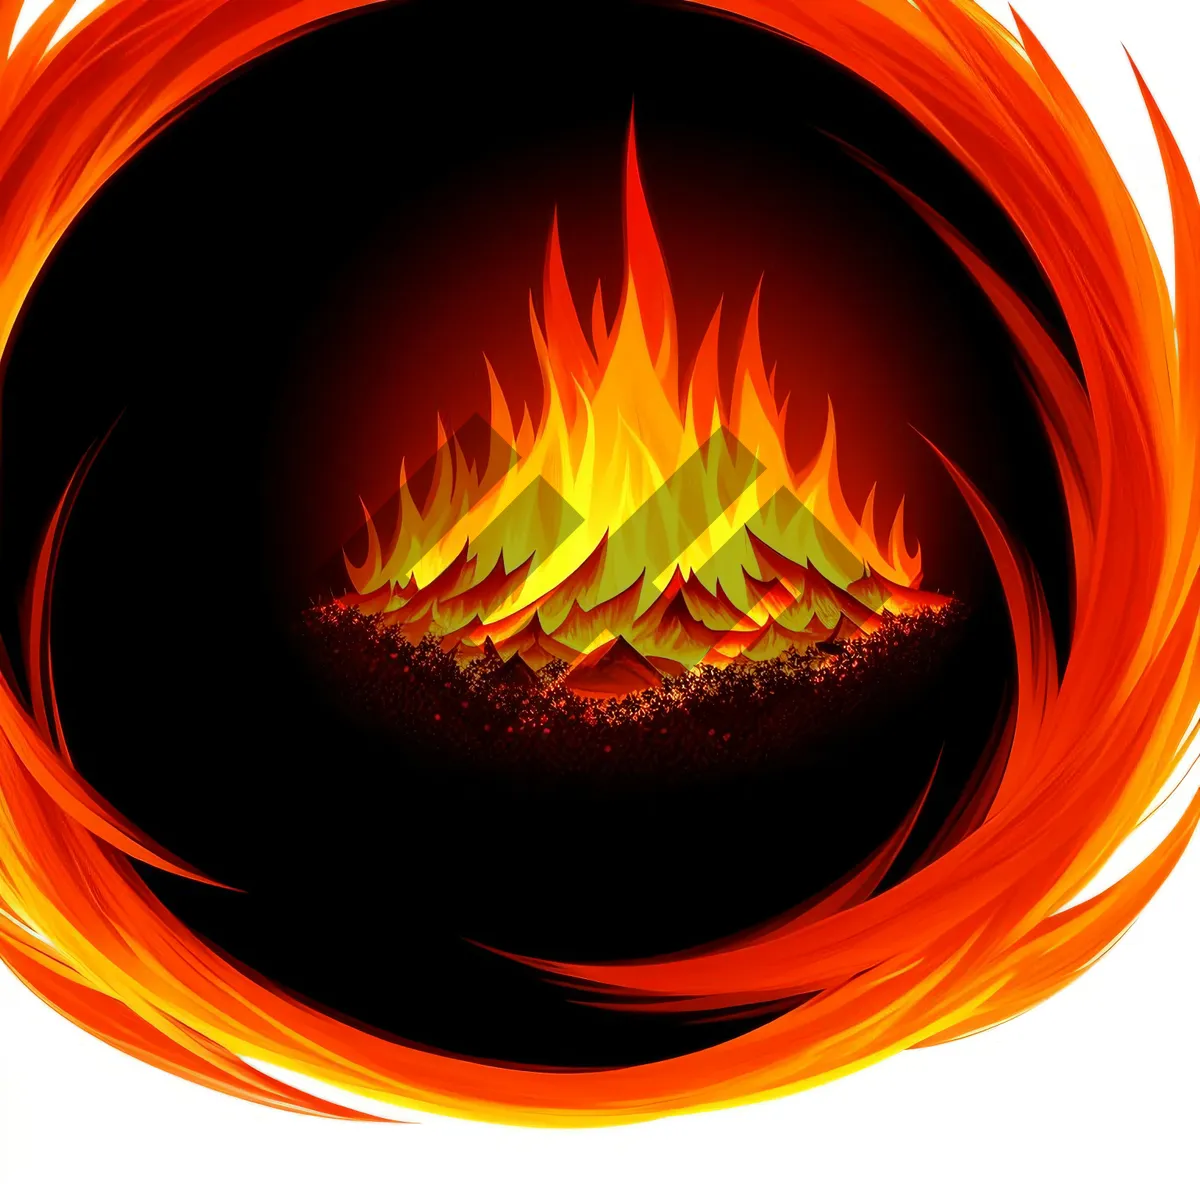 Picture of Blazing Heat: Vibrant Fire Graphic with Swirling Orange Flames